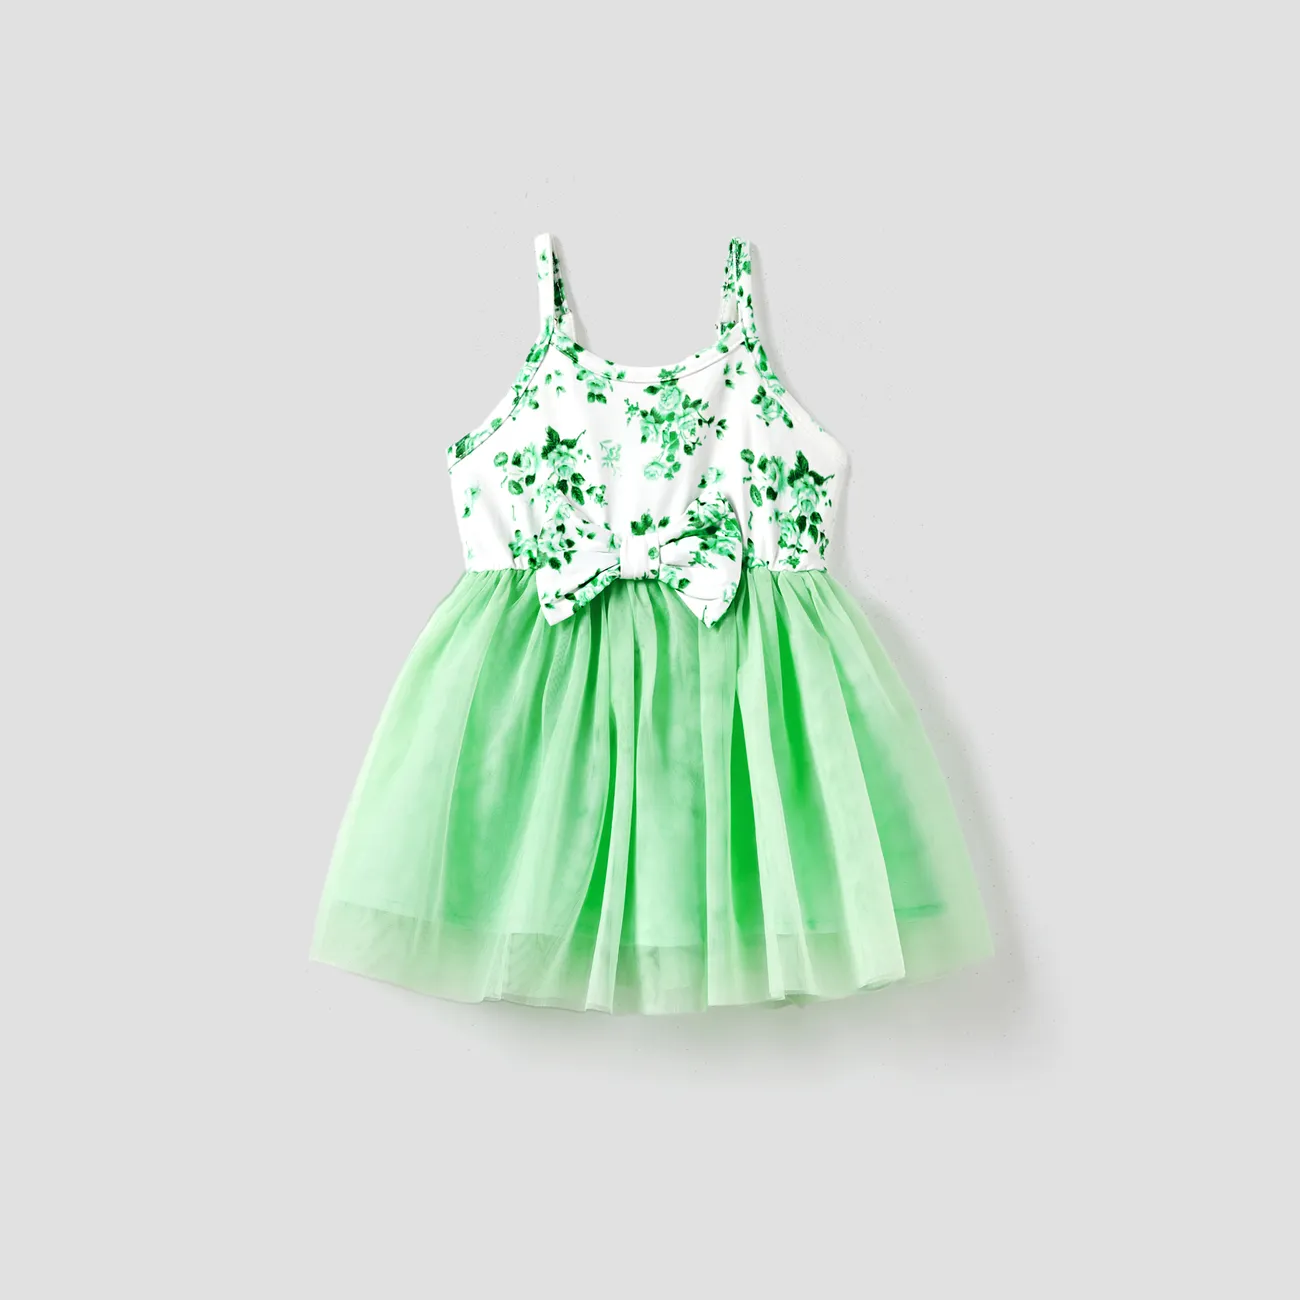 Mommy and Me Green Floral Ruched Bodycon Strap Dress or Spliced Mesh Strap Dress Aqua big image 1